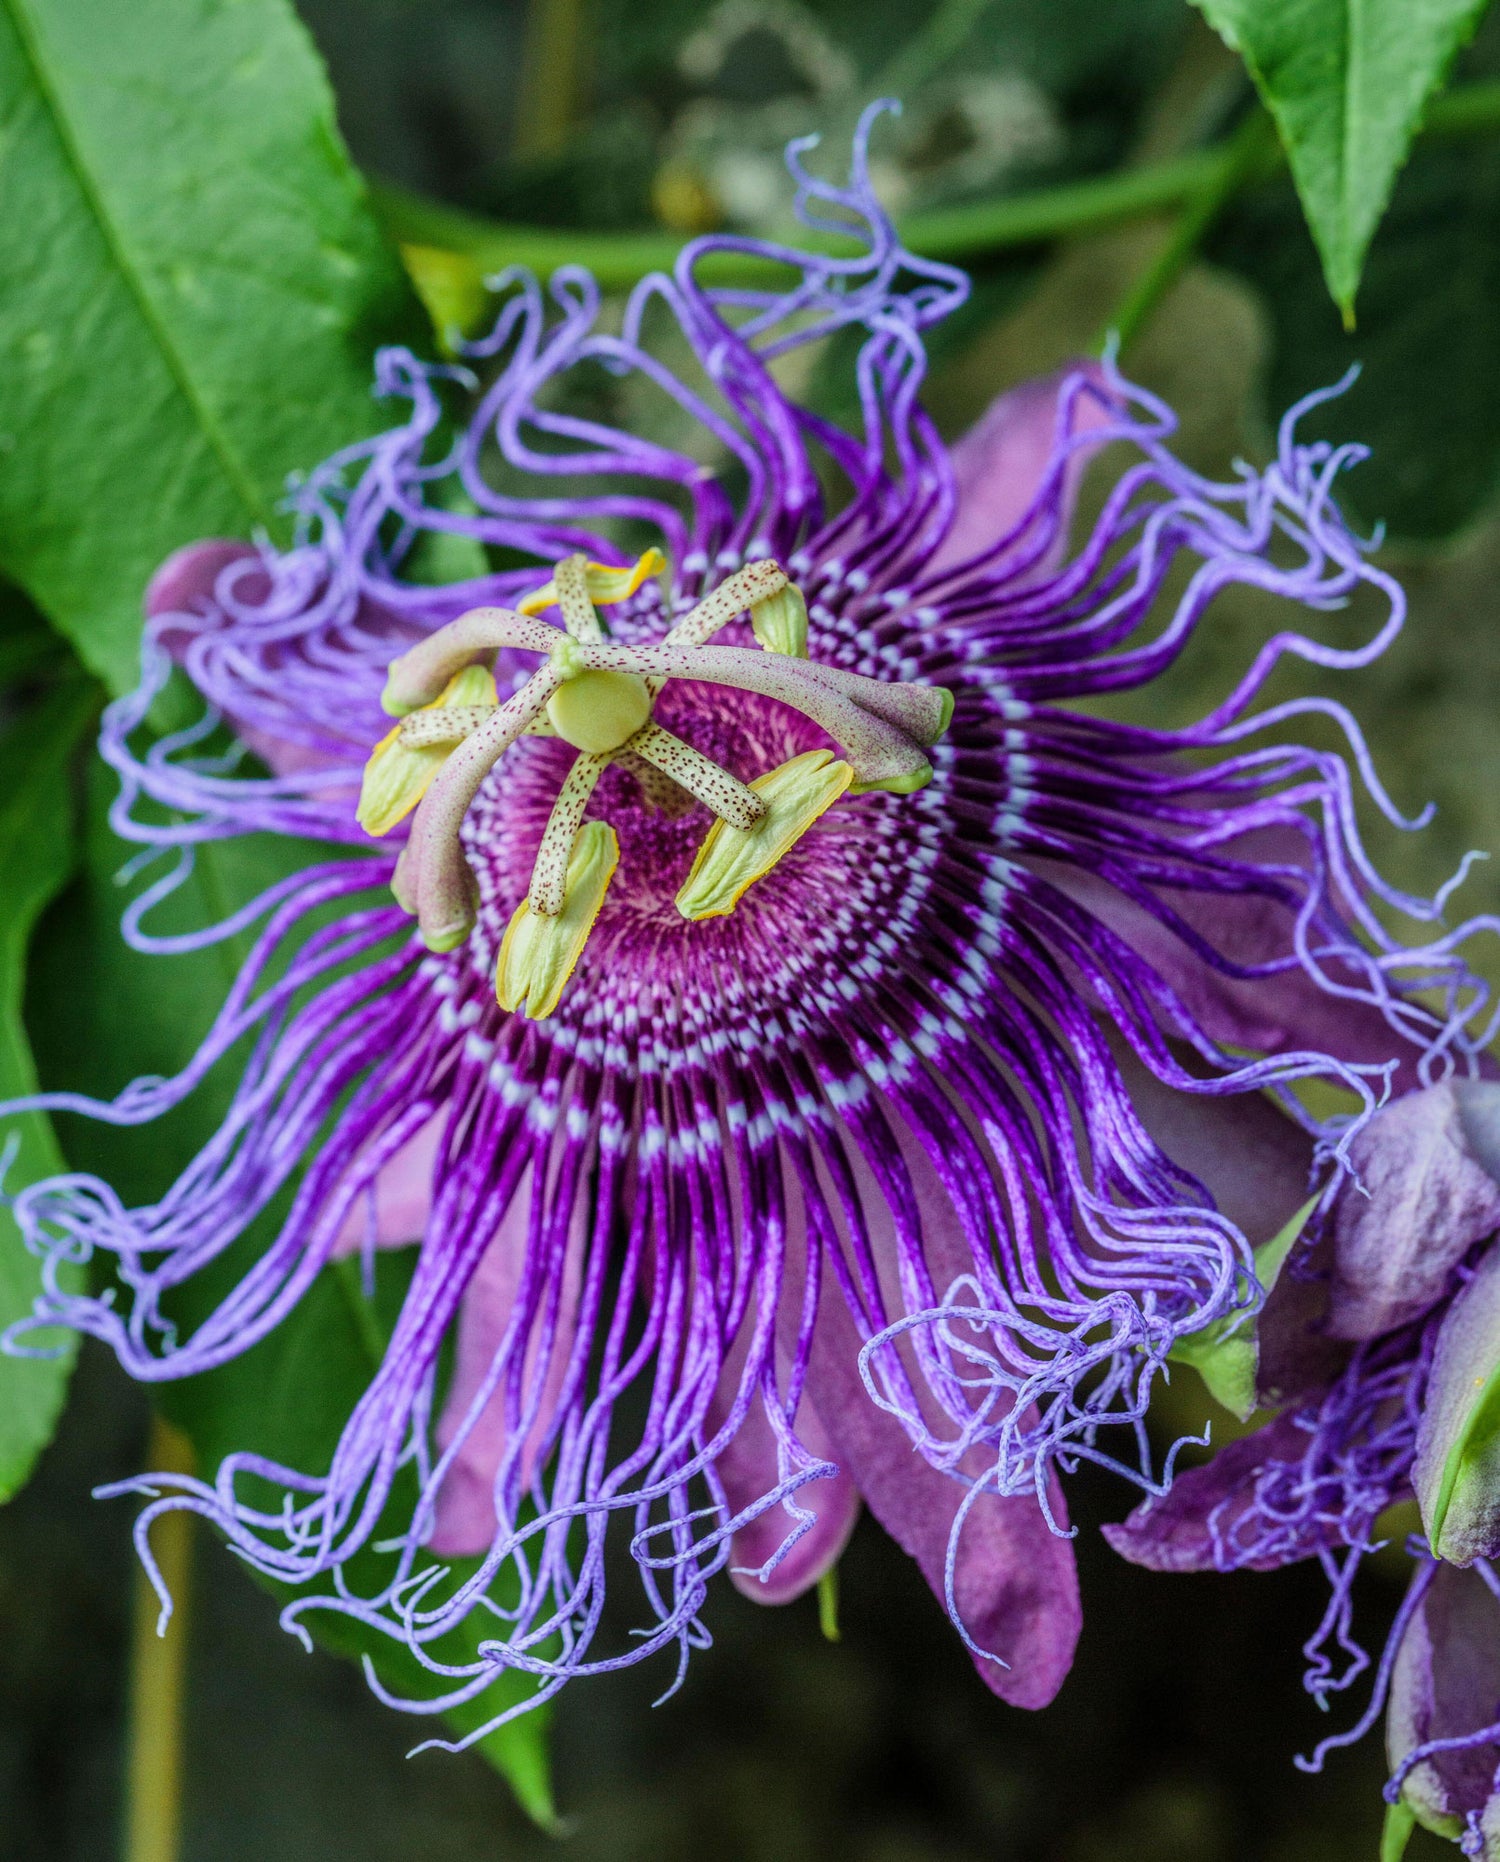 Incense Passionflower has giant purple flowers